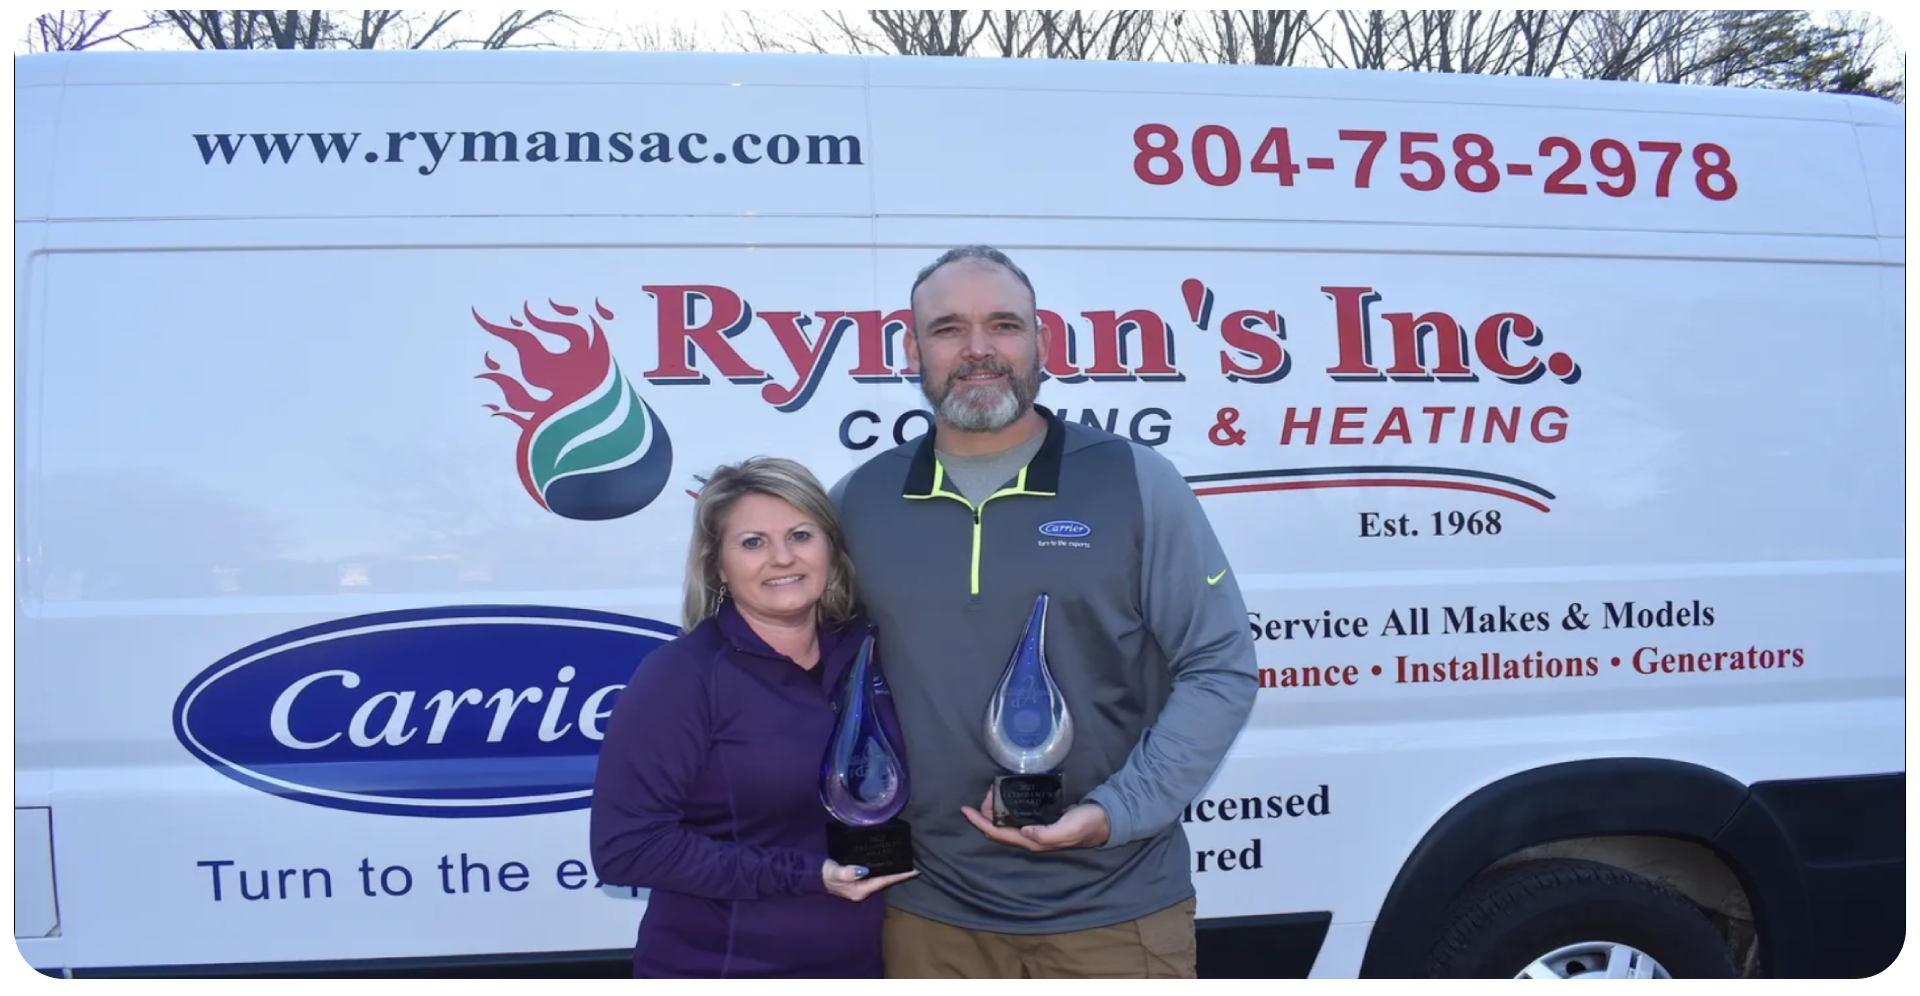 A man and woman holding up awards in front of a rymans logo.